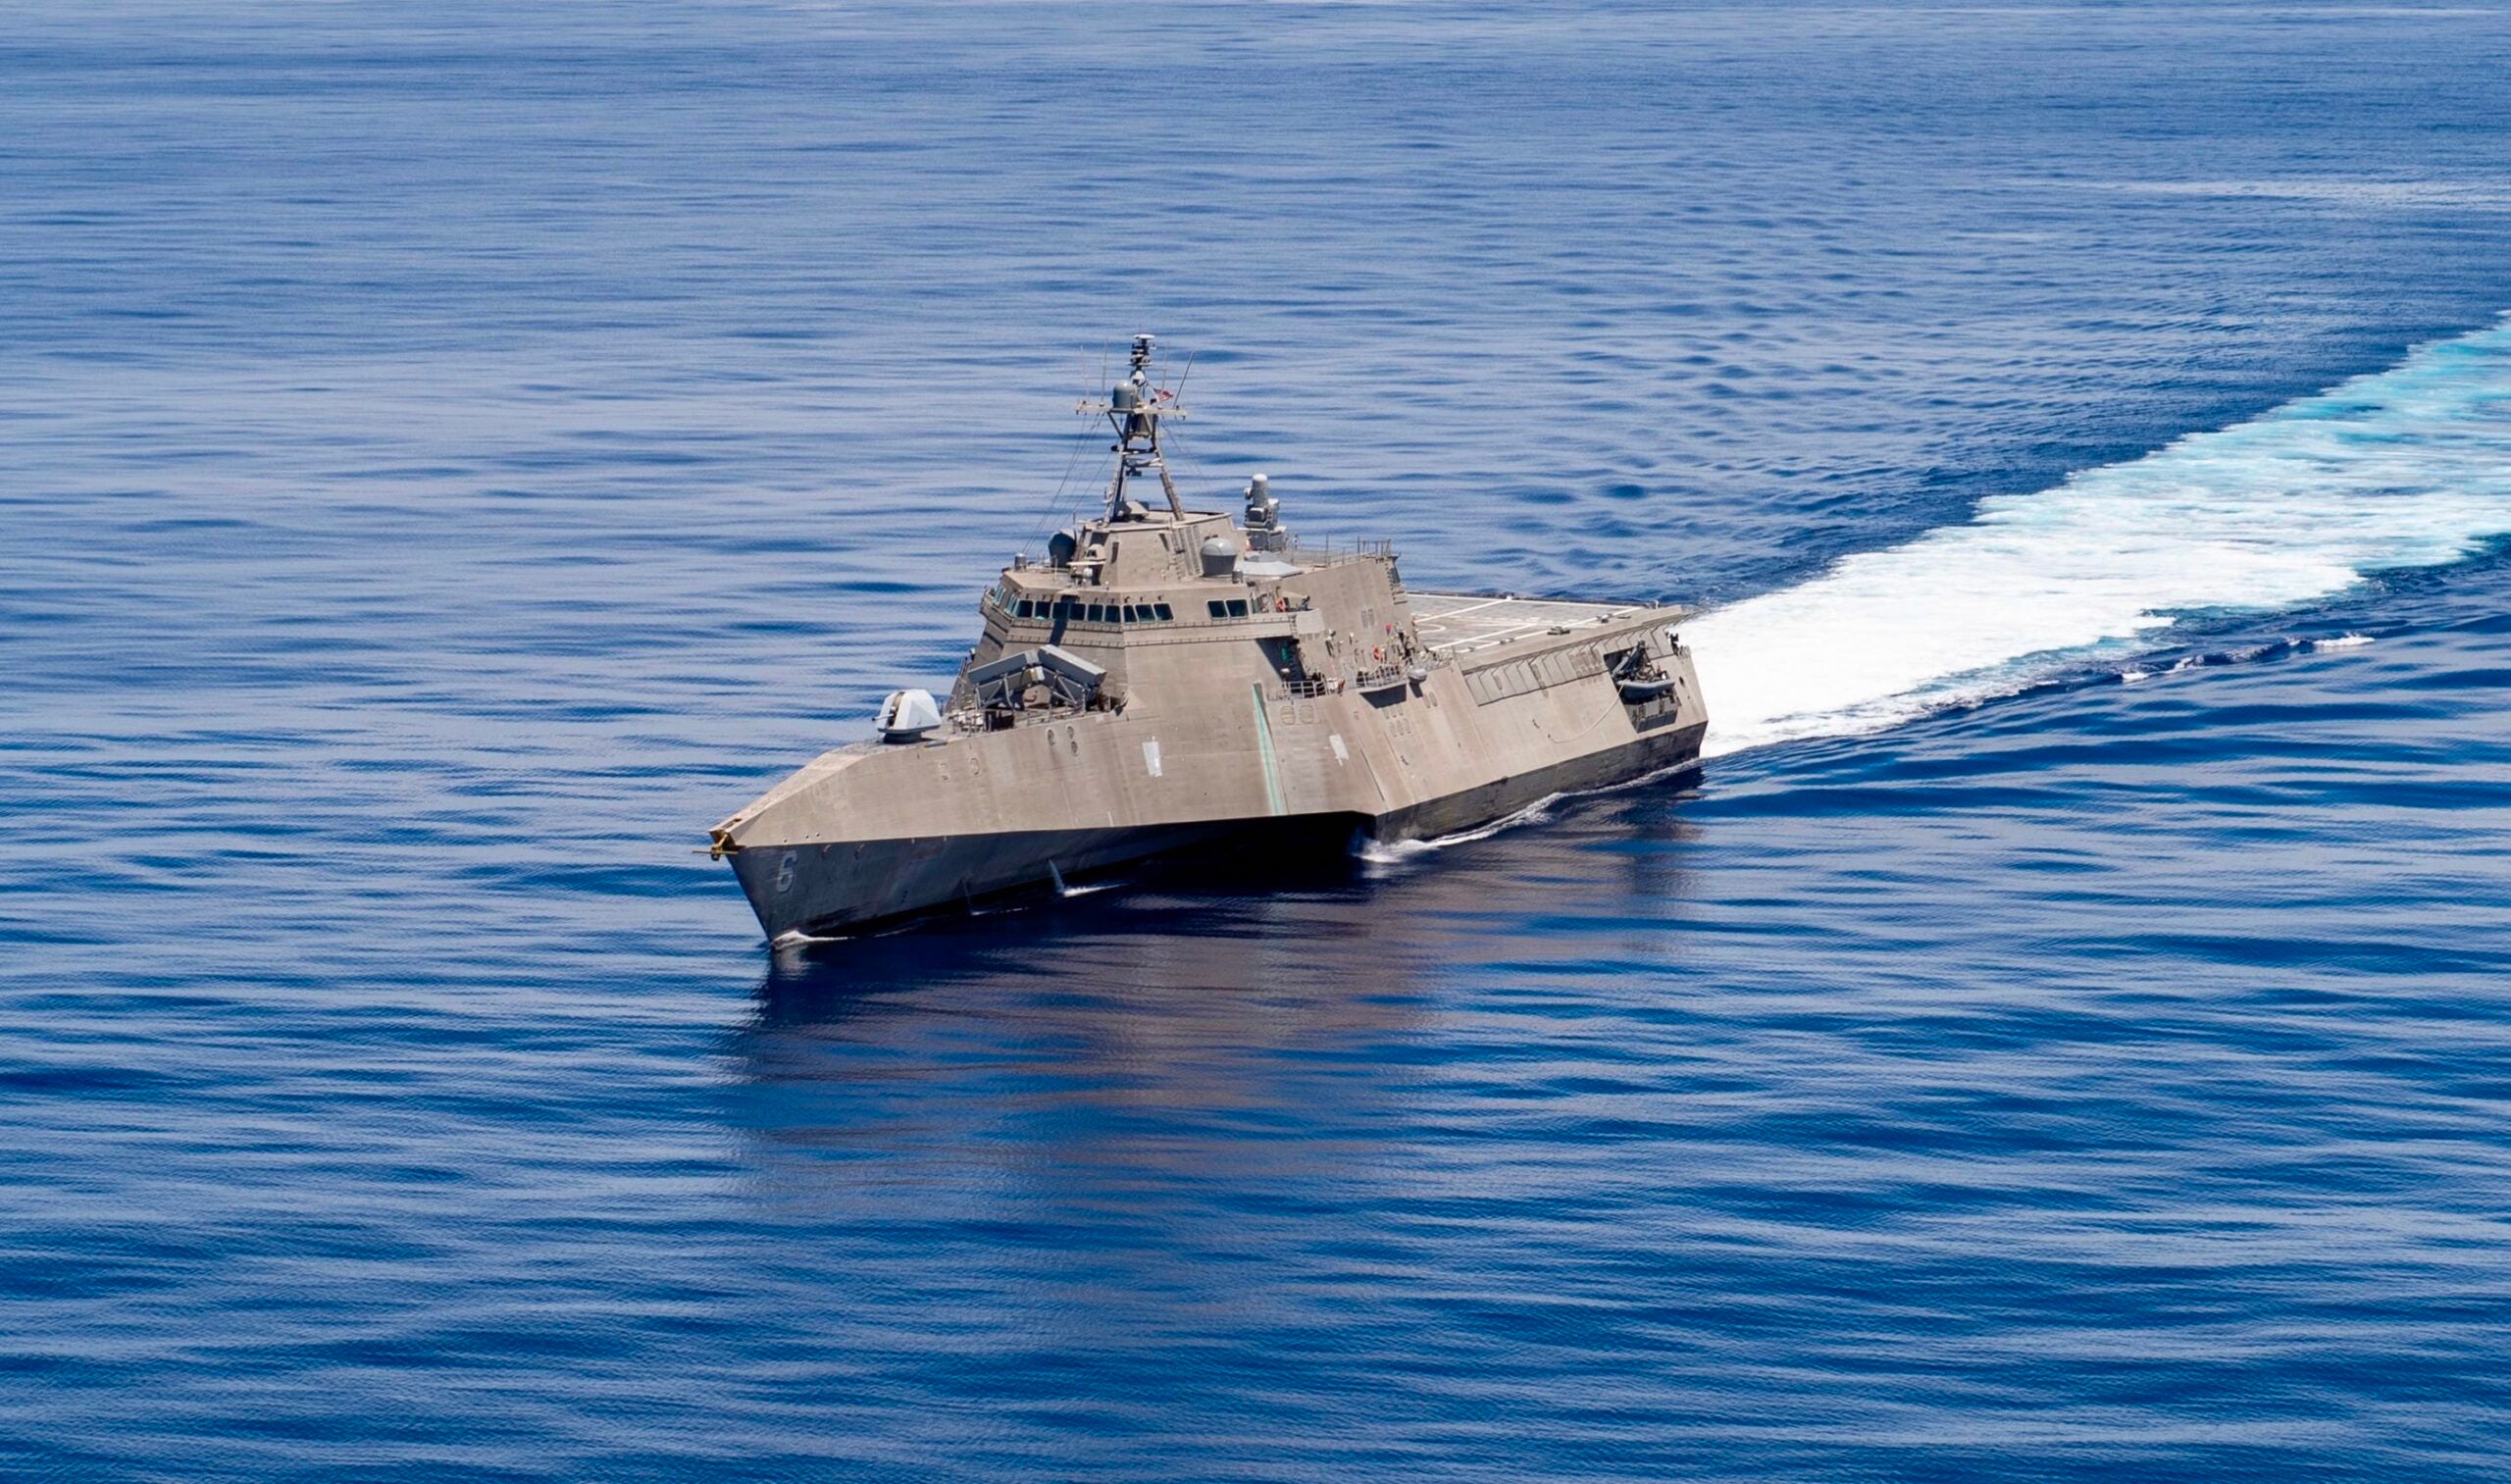 210819-N-QR052-1169

PACIFIC OCEAN (Aug. 19, 2021) The Independence-variant littoral combat ship USS Jackson (LCS 6) transits the Pacific Ocean. The Littoral Combat Ship (LCS) is a fast, agile, mission-focused platform designed to operate in near-shore environments, winning against 21st-century coastal threats. Jackson is conducting routine operations in the U.S. 3rd Fleet area of operations.  (U.S. Navy photo by Mass Communication Specialist 3rd Class Kelsey S. Culbertson/Released)